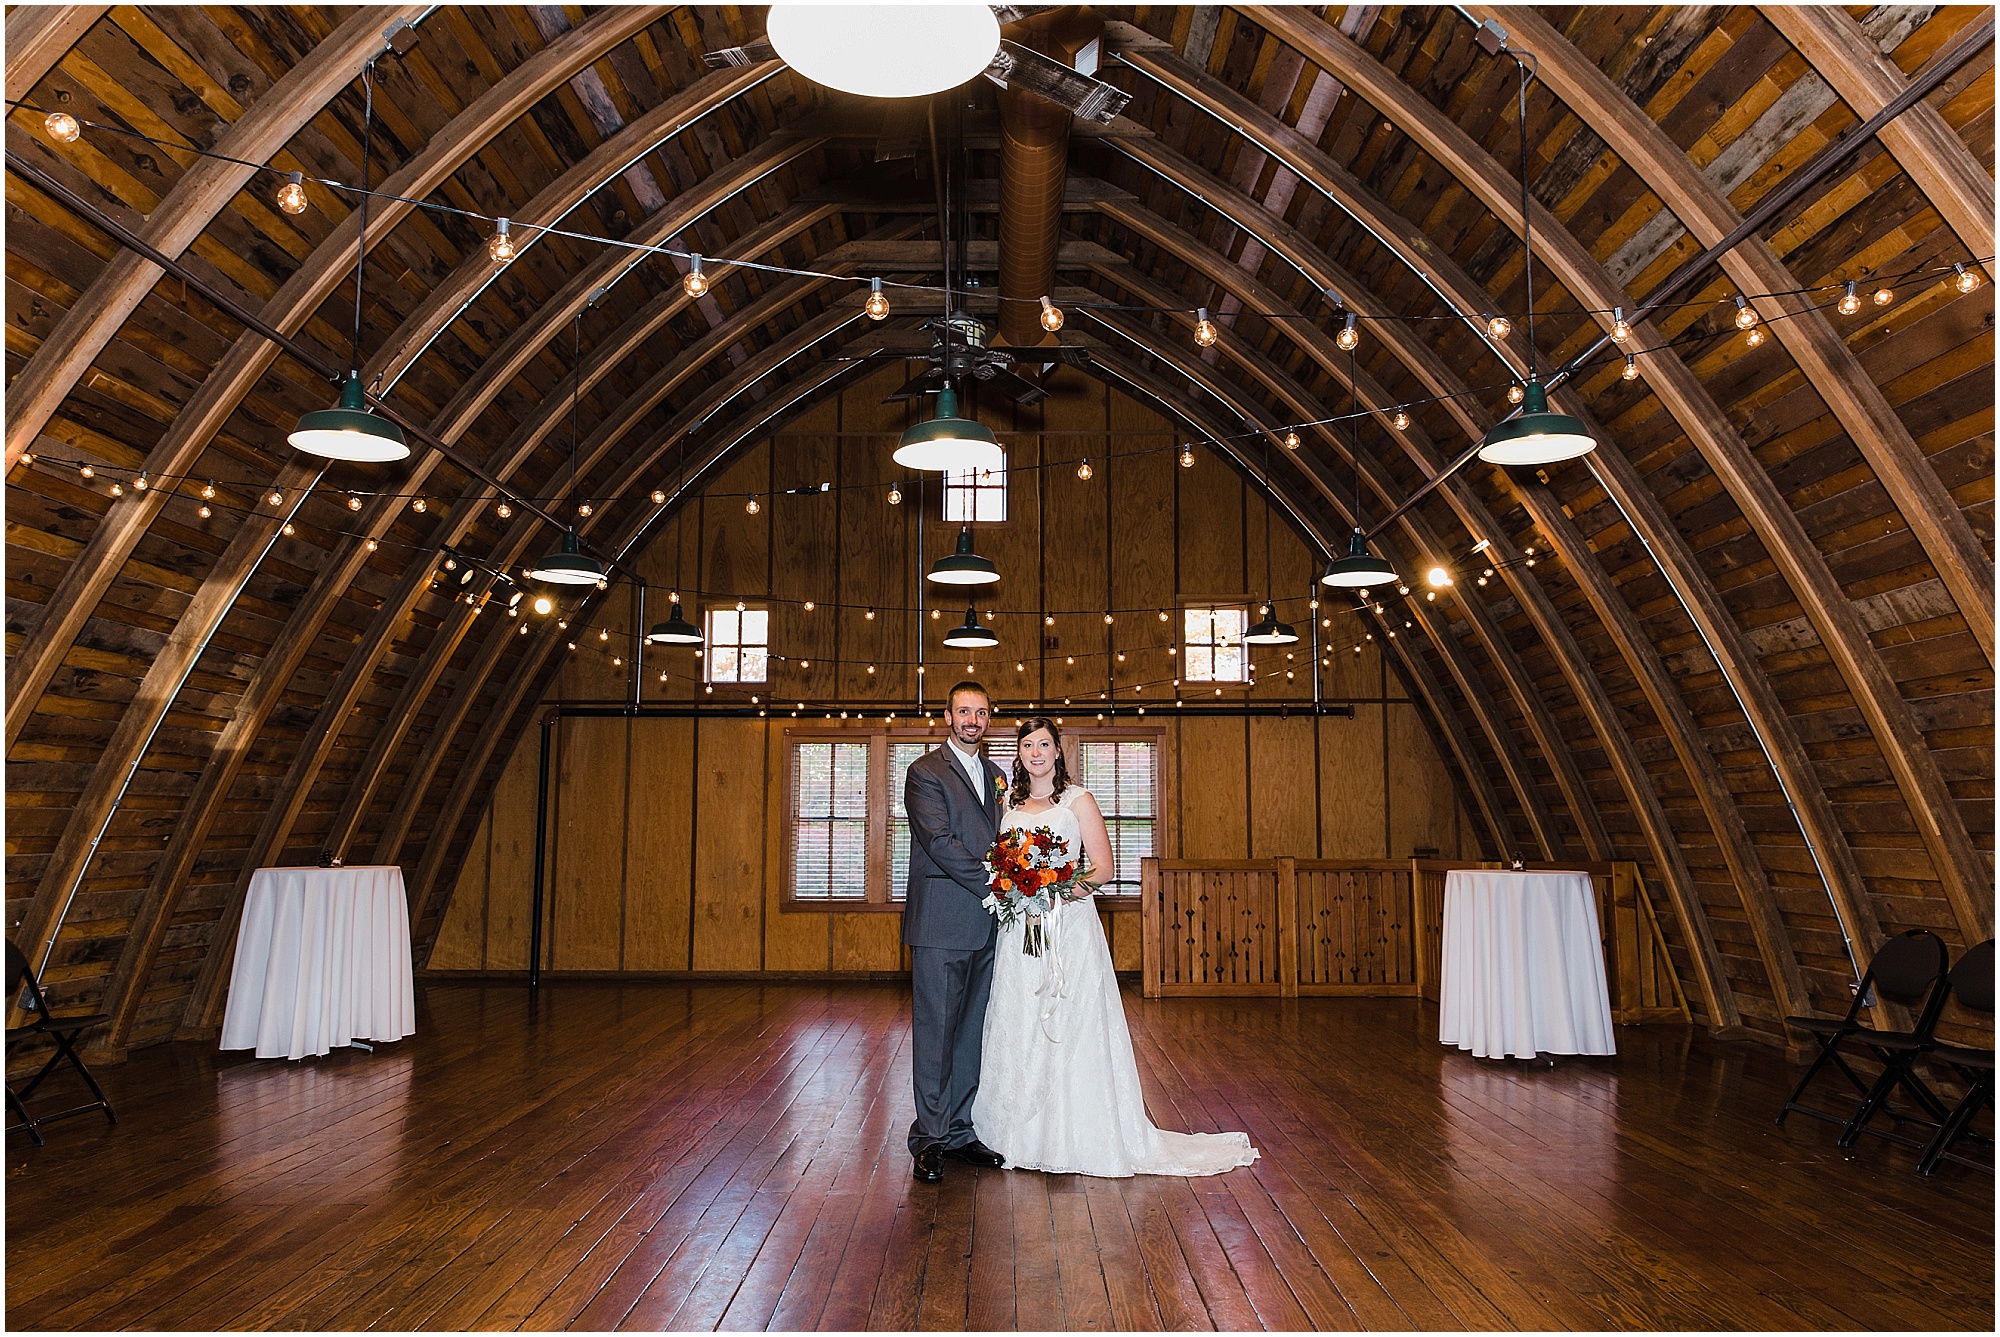 The hardwood interior of the historic Hollinshead Barn is a beautiful place for a formal wedding portrait in Bend, OR. | Erica Swantek Photography